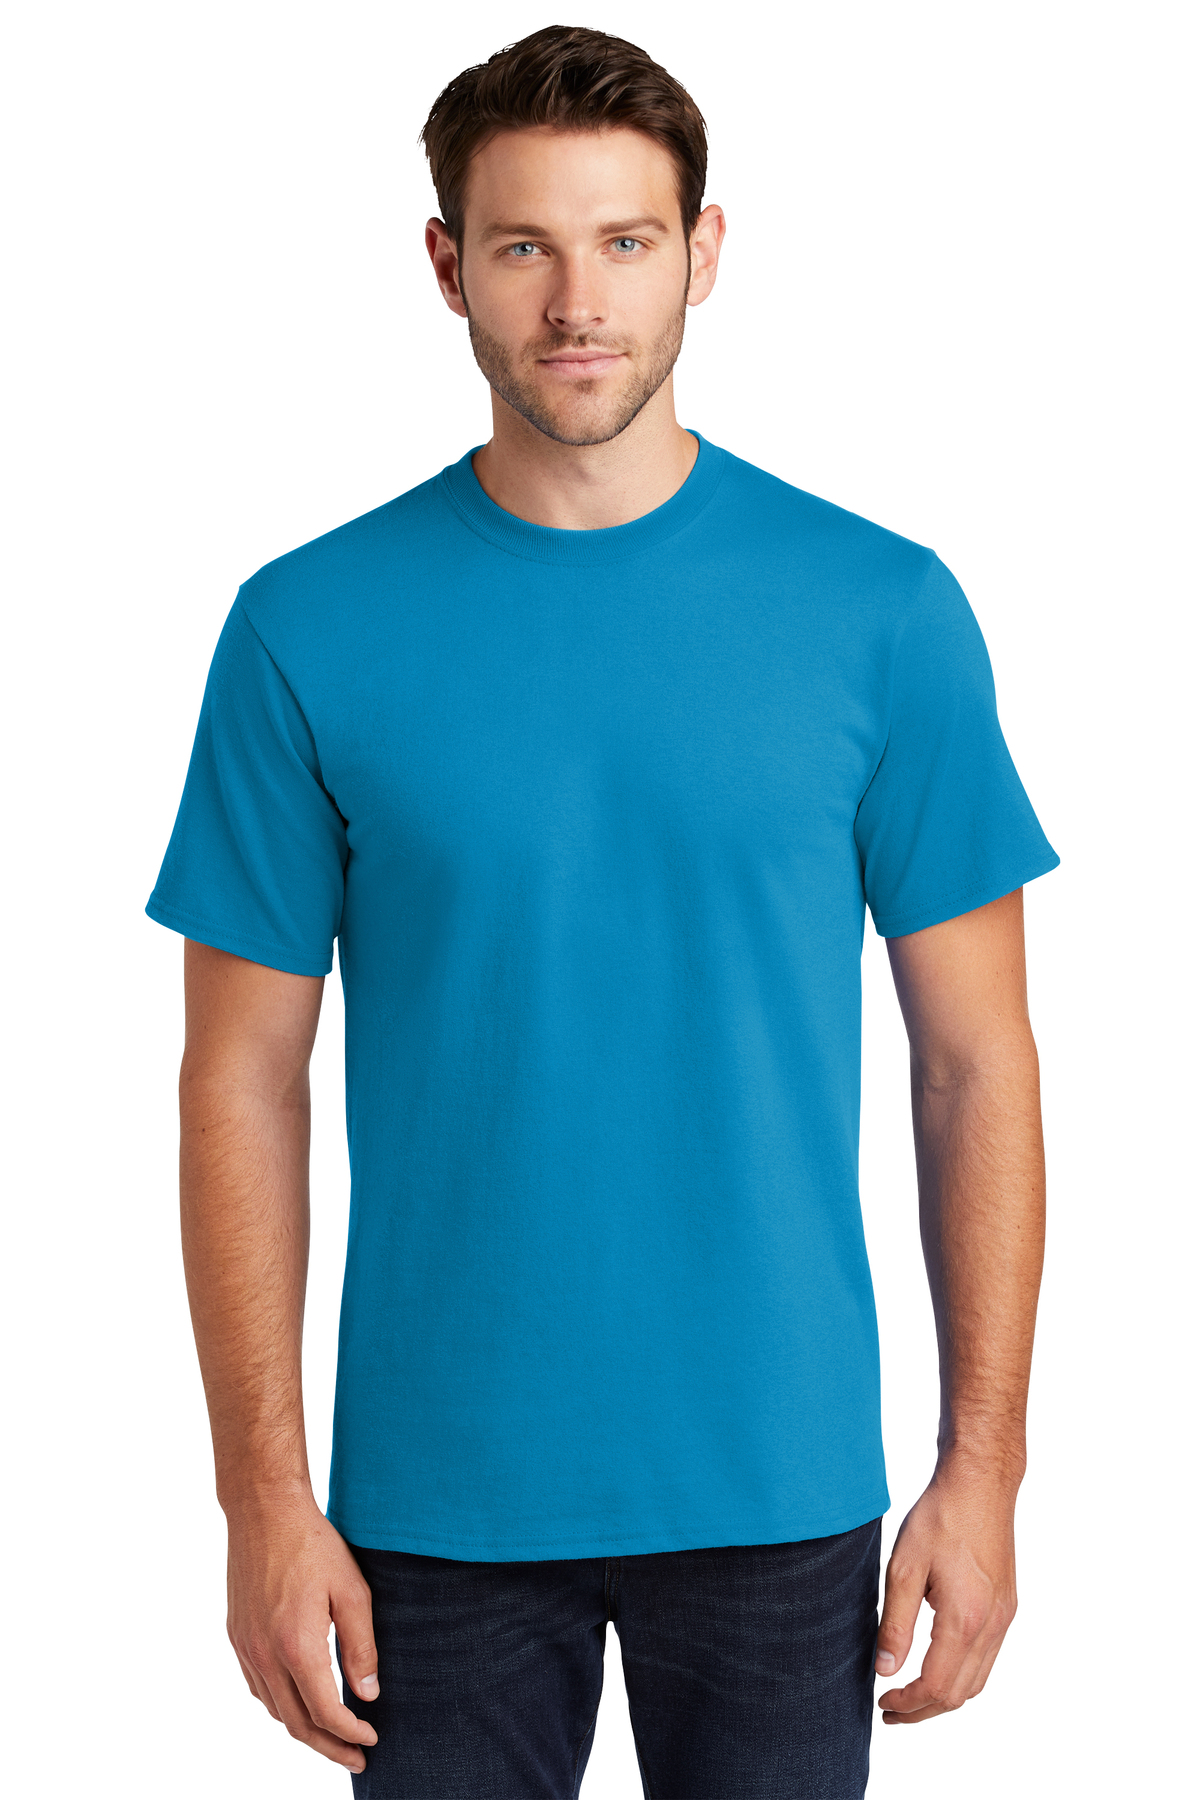 Port & Company Embroidered Men's Essential Tee | All Products - Queensboro